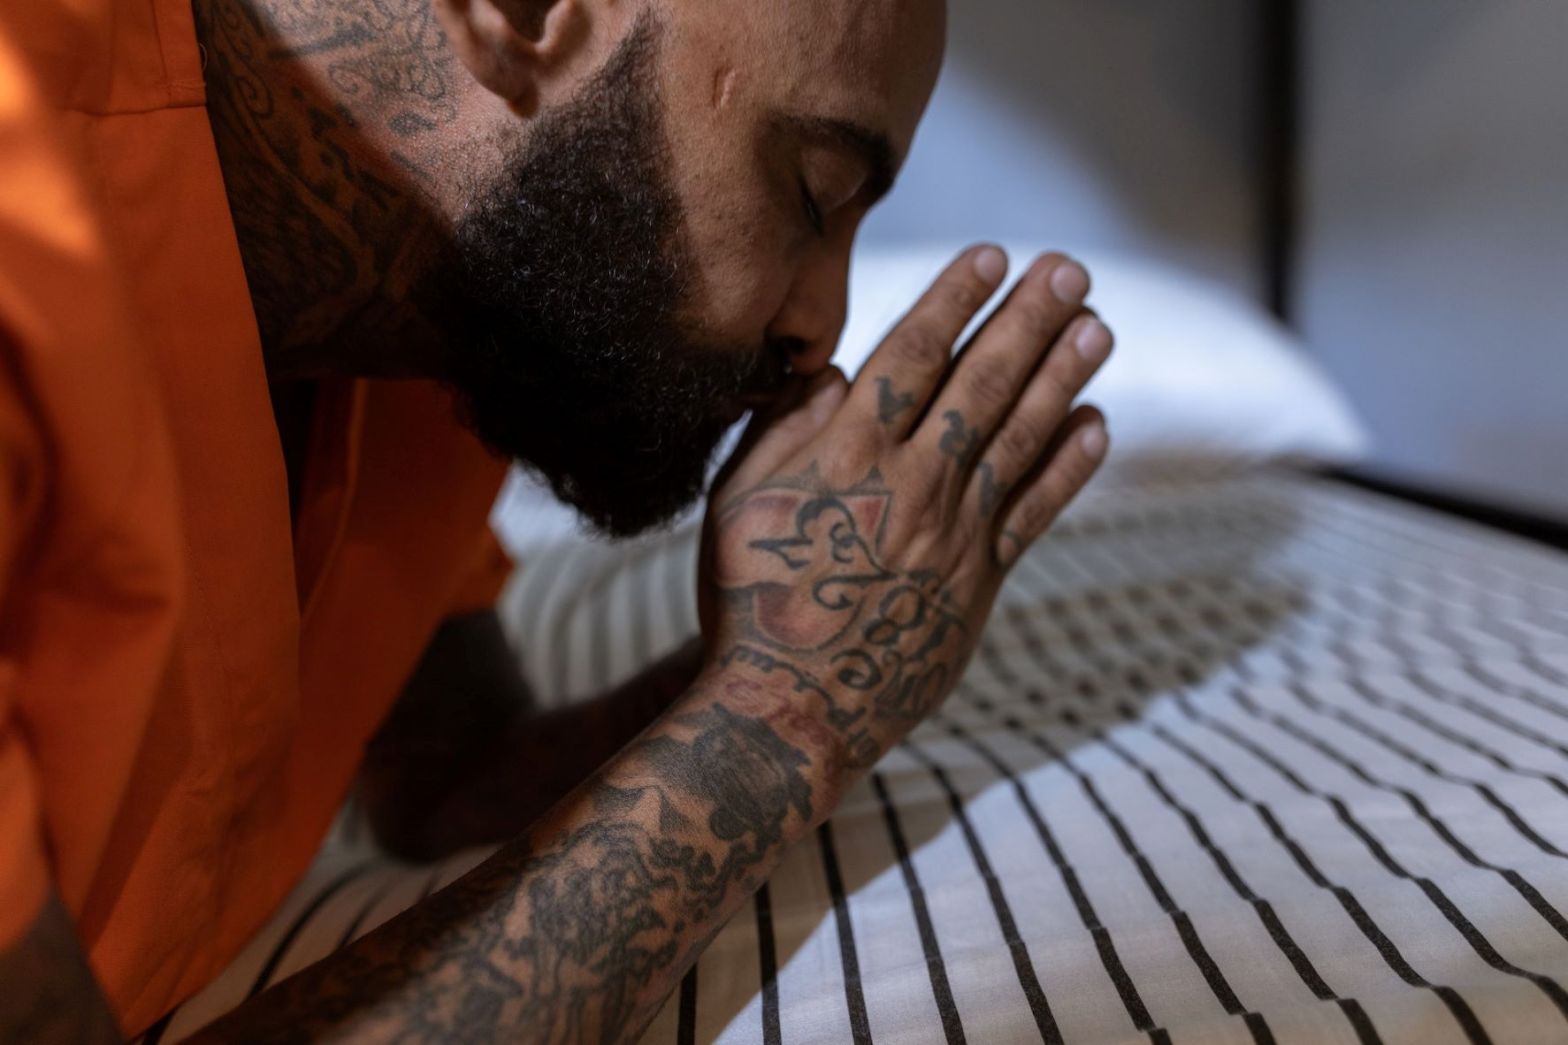 A tattooed convict clasps his hand in prayer beside his cell bed.